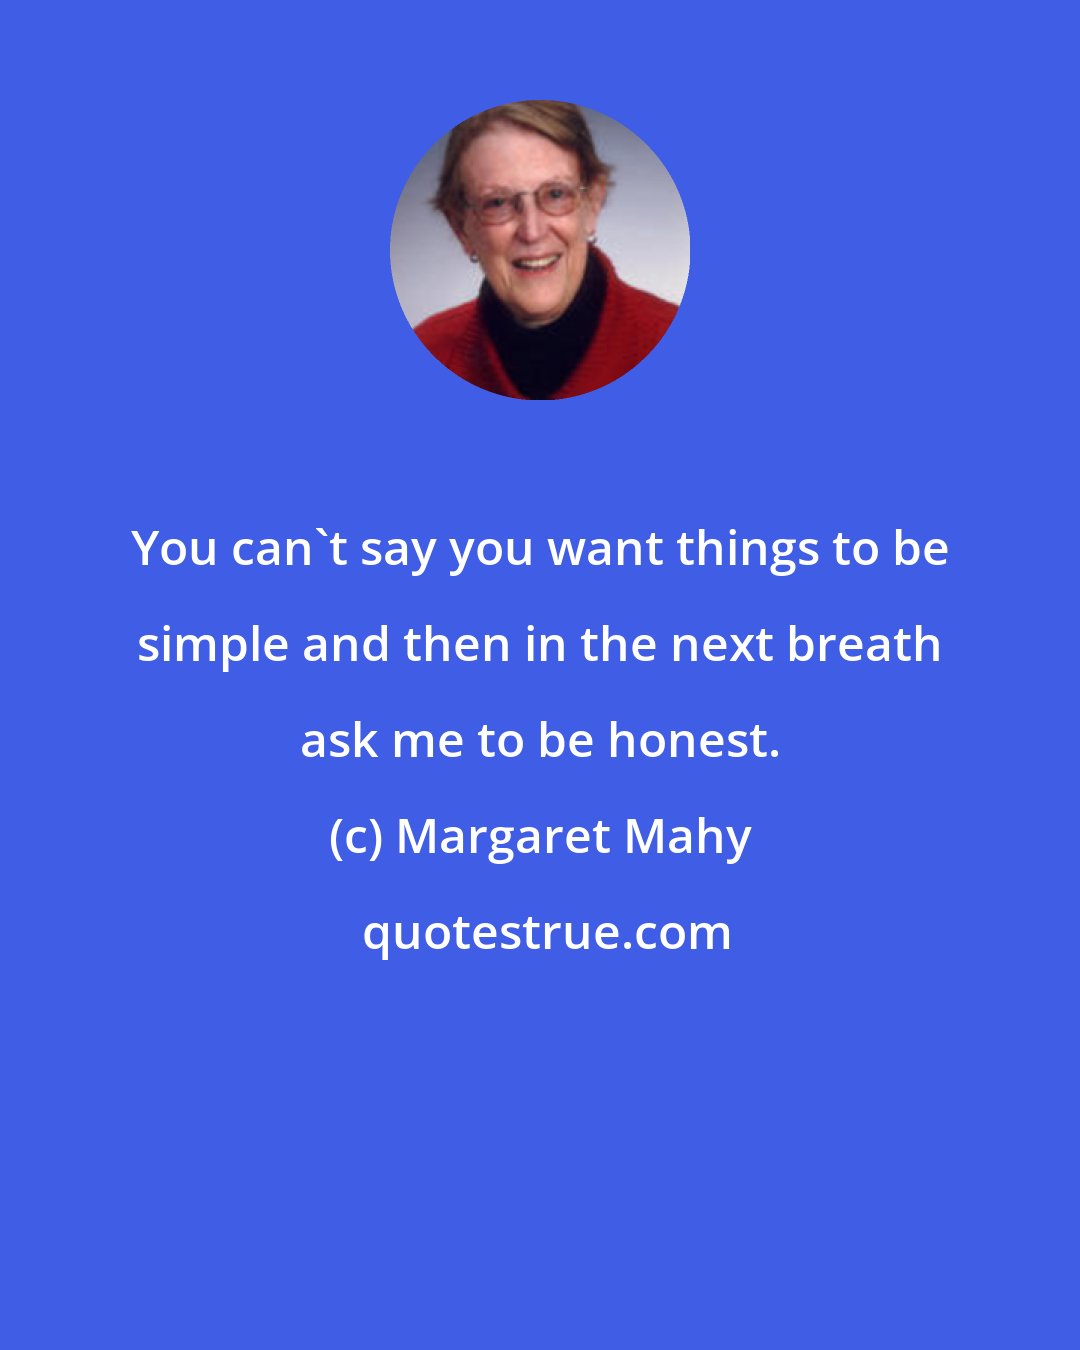 Margaret Mahy: You can't say you want things to be simple and then in the next breath ask me to be honest.